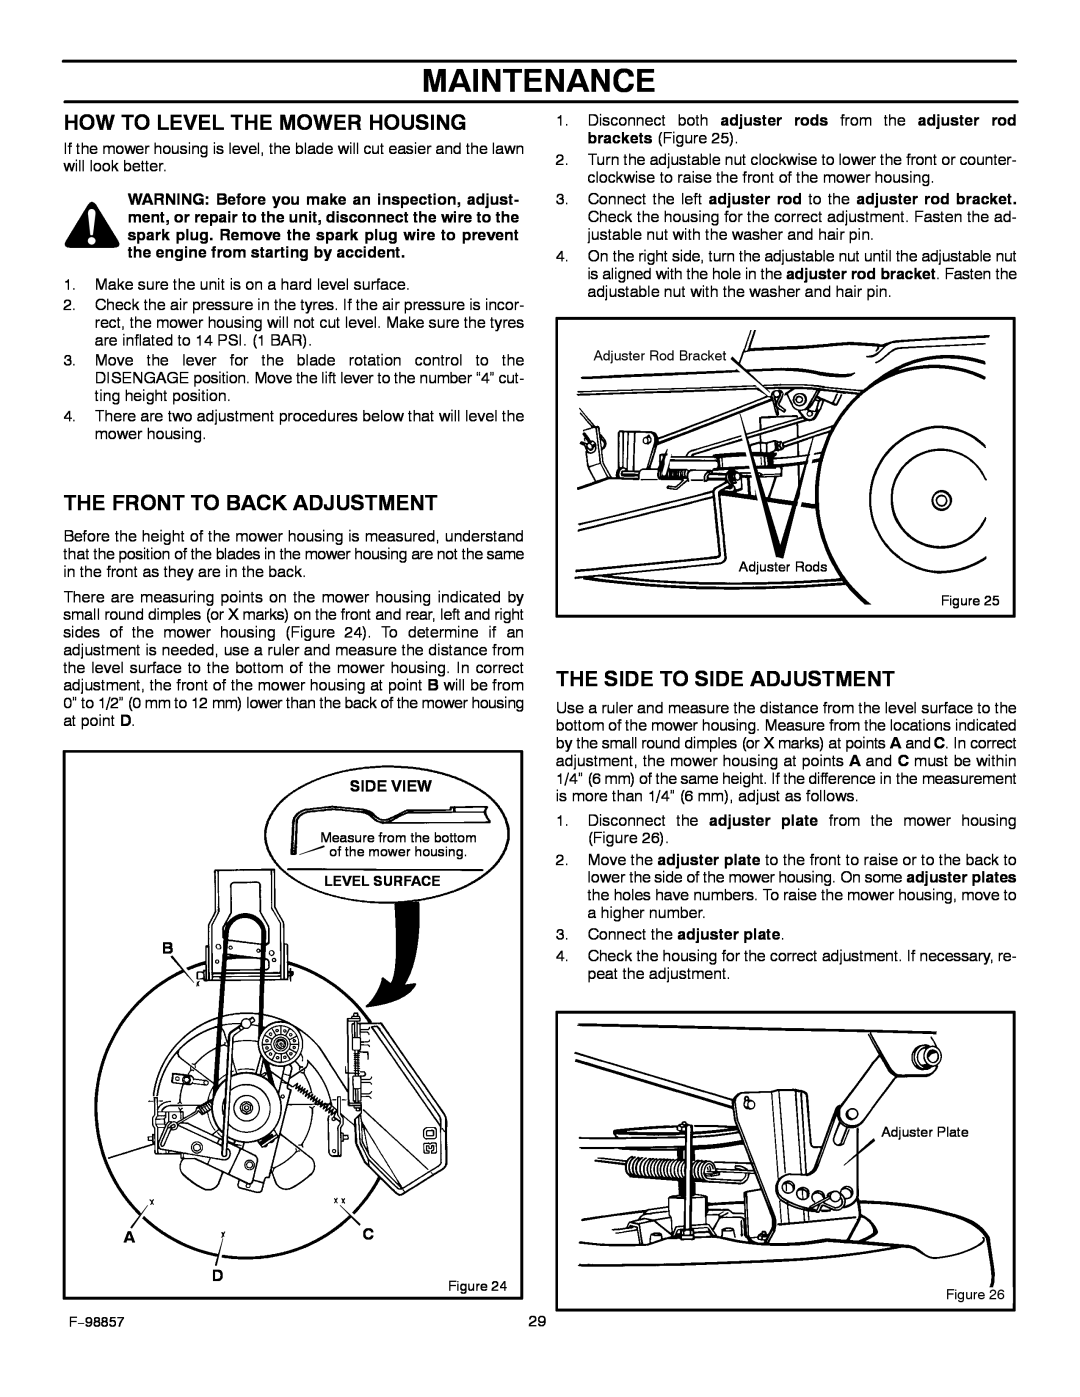 Hayter Mowers 30-Dec manual How To Level The Mower Housing, The Front To Back Adjustment, The Side To Side Adjustment 